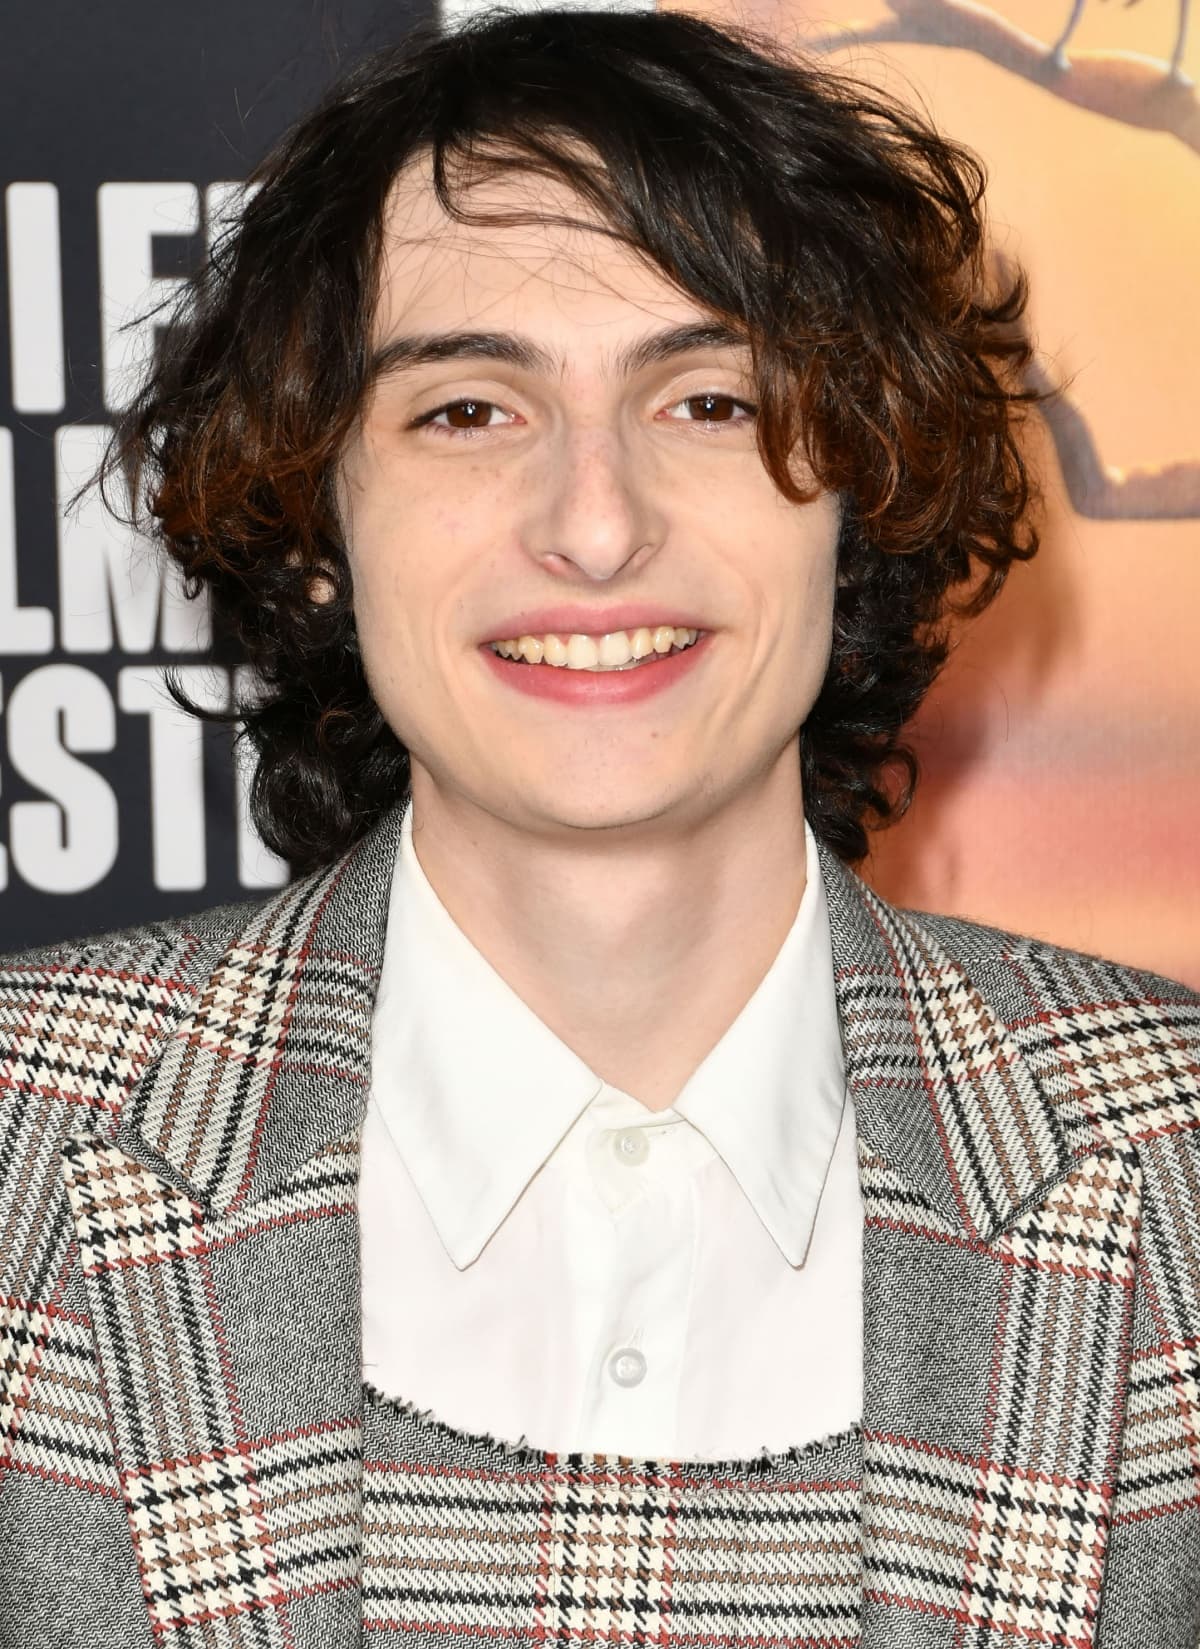 Finn Wolfhard, born December 23, 2002, is a Canadian actor and musician notable for his acting roles in the Netflix series "Stranger Things" and the horror films "It" and its sequel, and for his directorial debut with the short film "Night Shifts"; additionally, he is known for his musical contributions as the lead vocalist and guitarist for rock band Calpurnia and as a member of The Aubreys